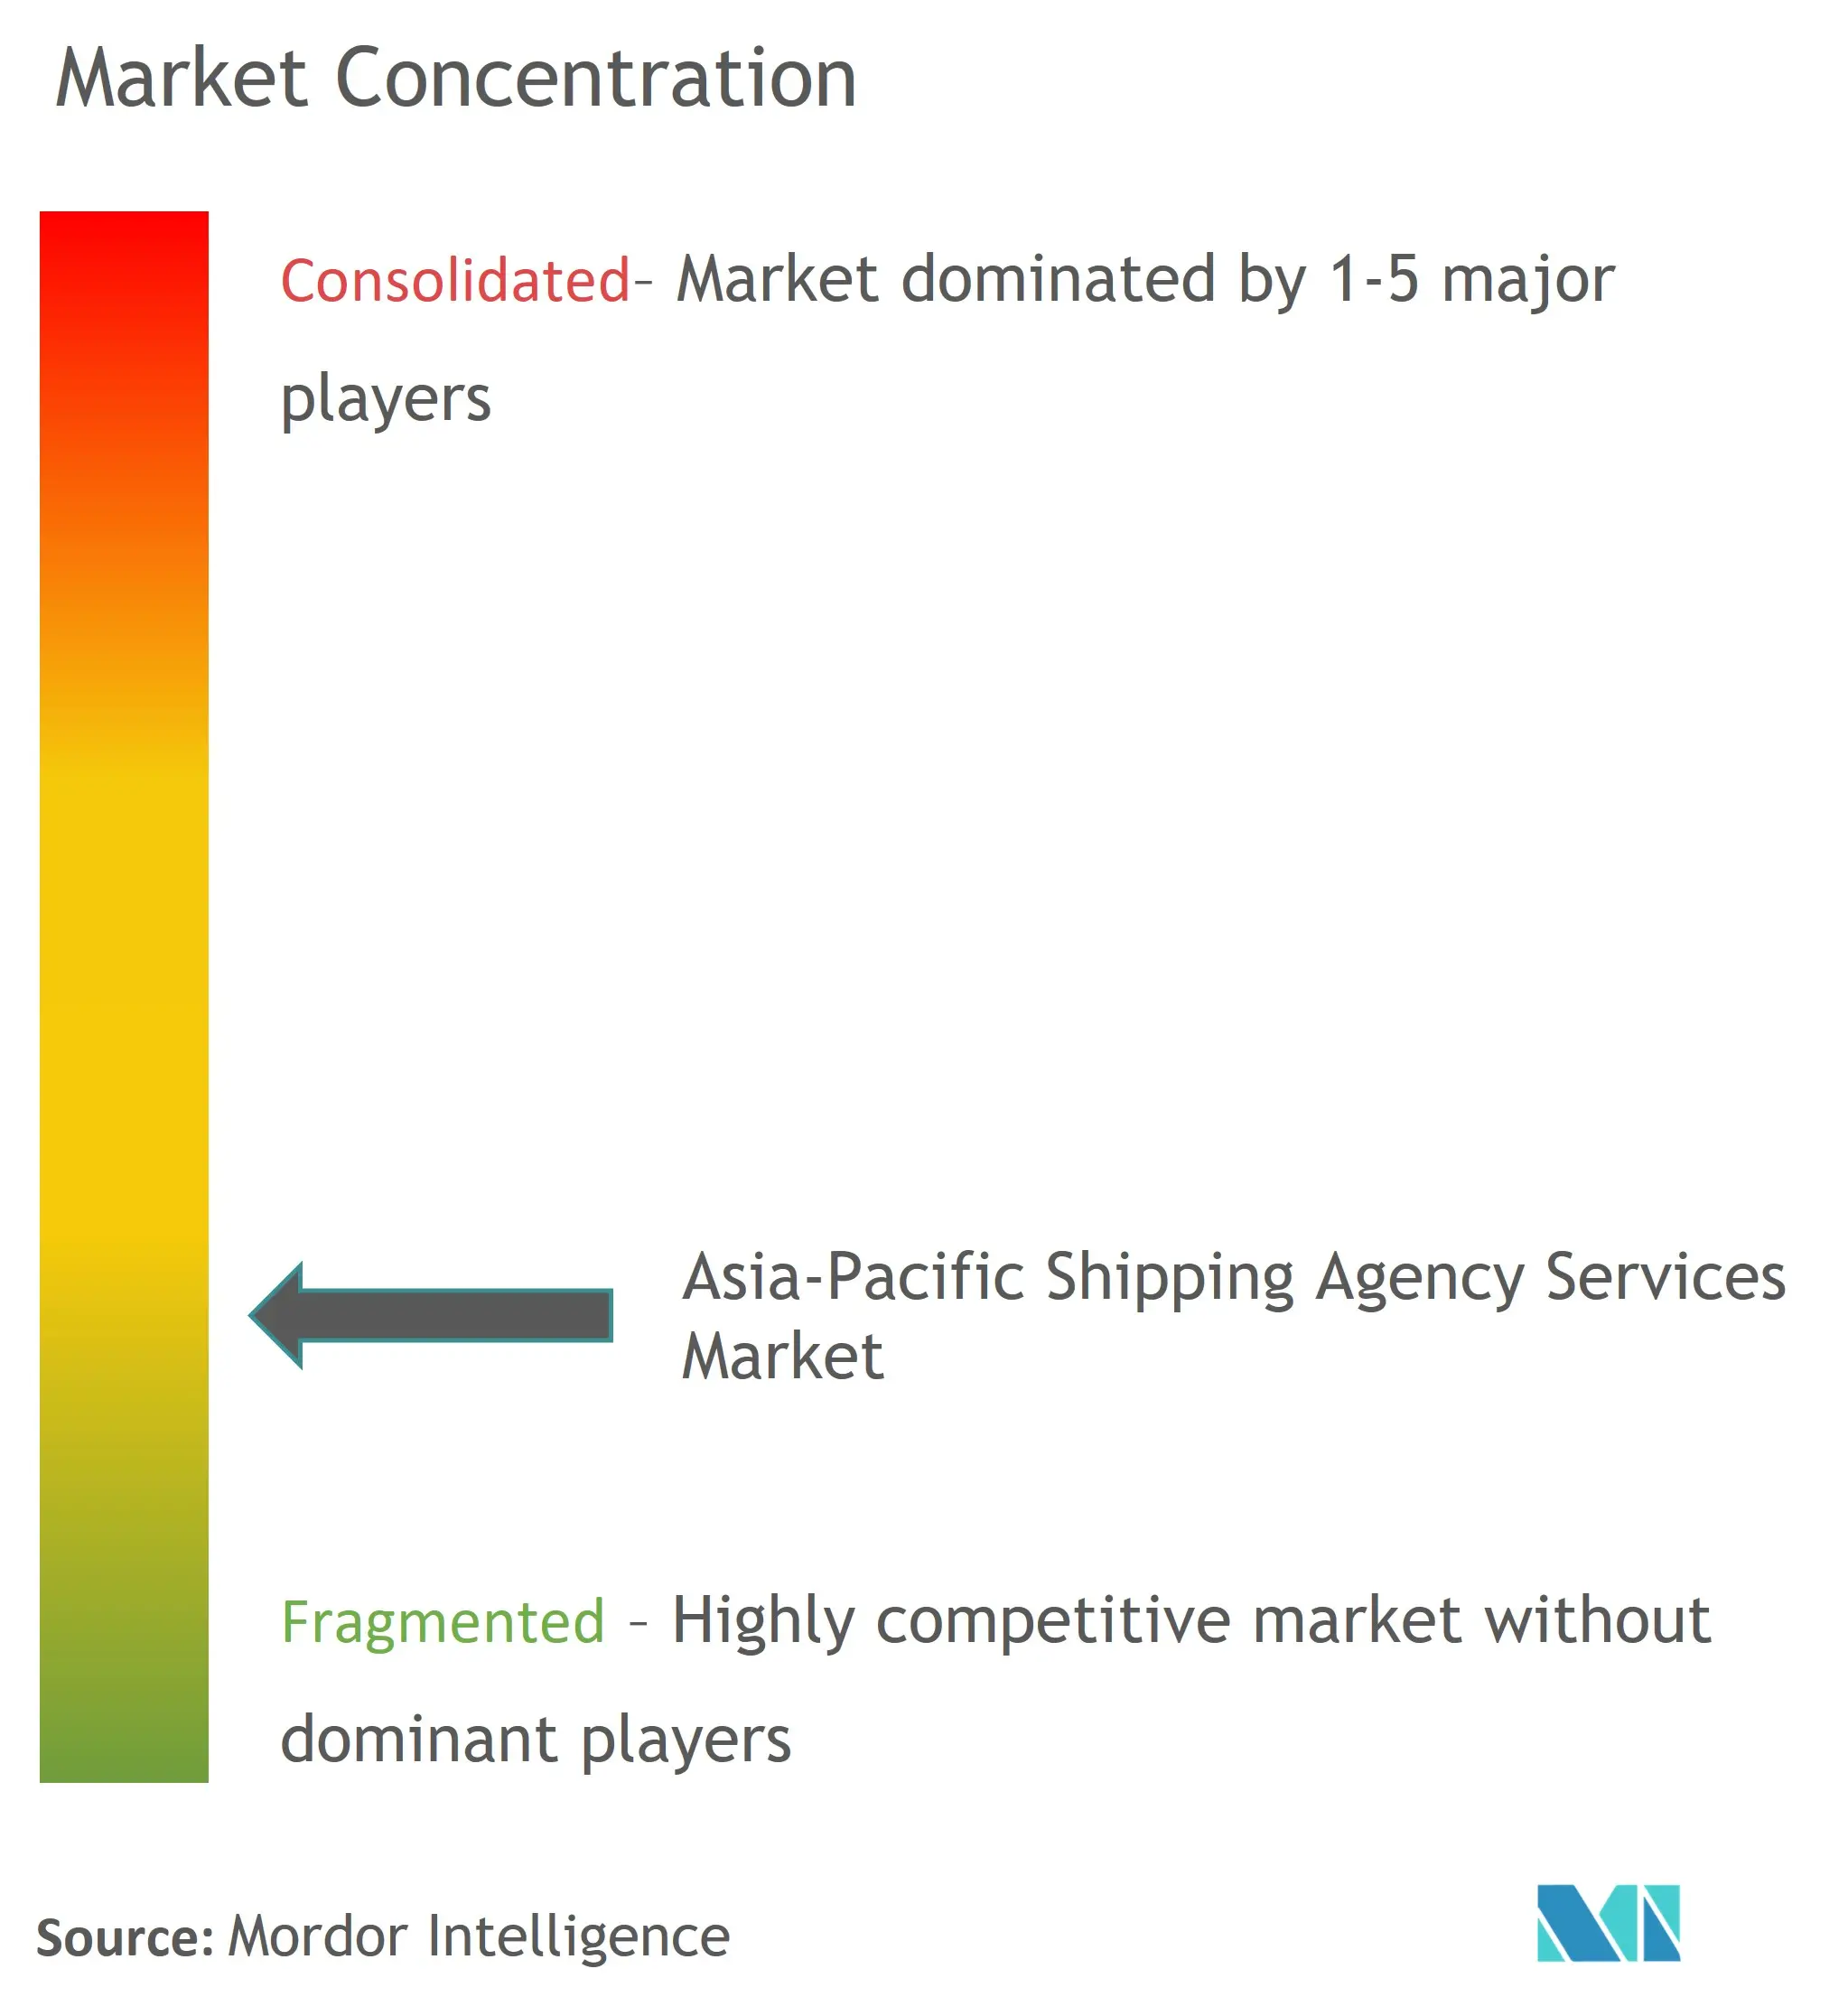 Asia-Pacific Shipping Agency Services Market Concentration